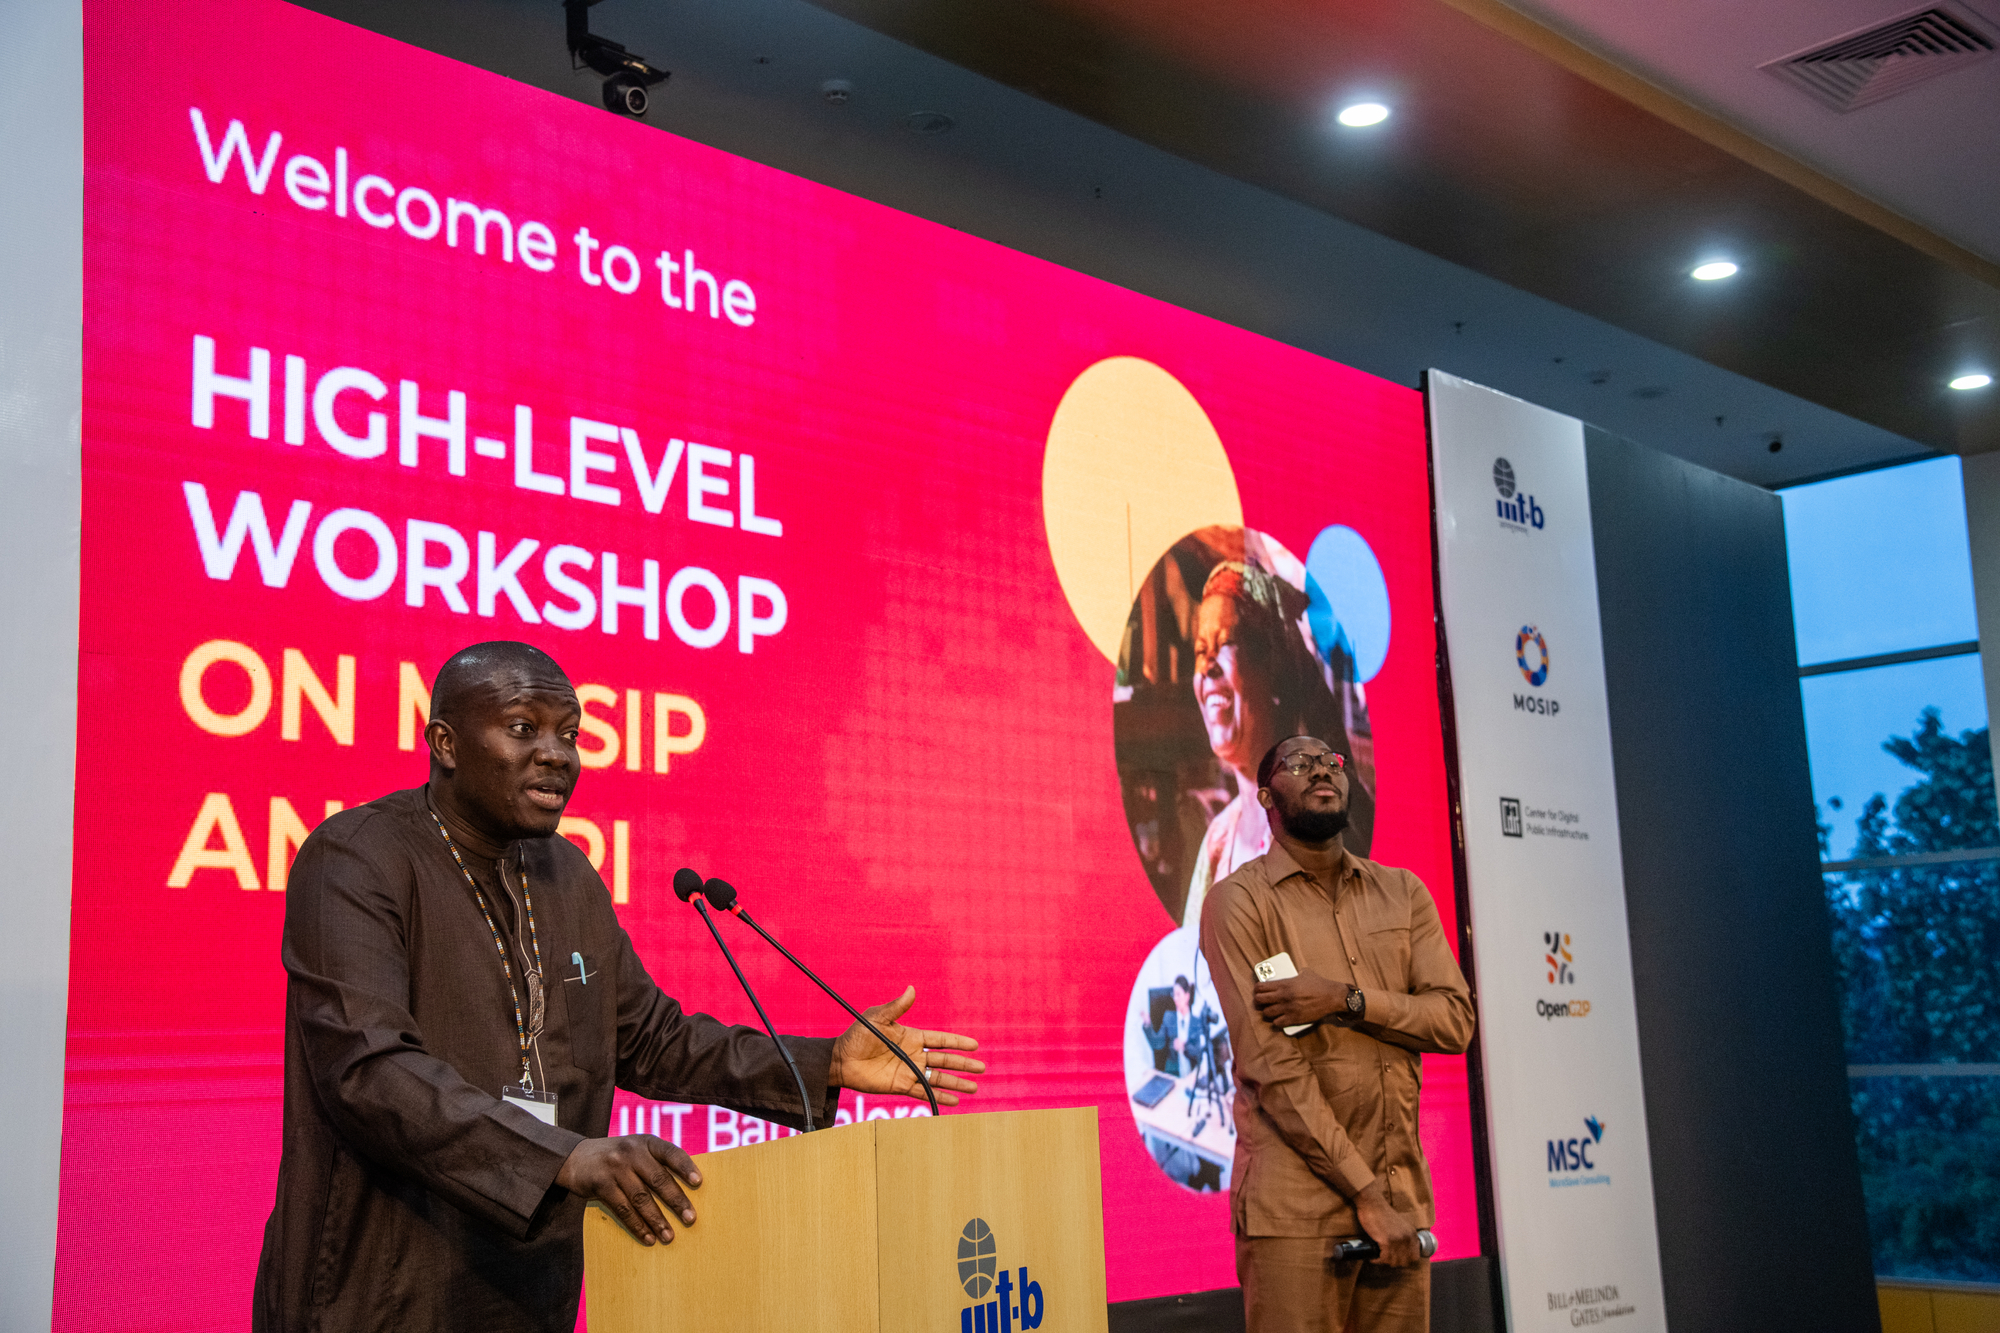 Professor Assane Gueye, and Gabi Adotevi, MOSIP Account Manager for West Africa, delivers an address at the High-Level Workshop on MOSIP and Digital Public Infrastructure, conducted at the International Institute of Information Technology (IIIT) campus in Bengaluru, India on October 4, 2023.